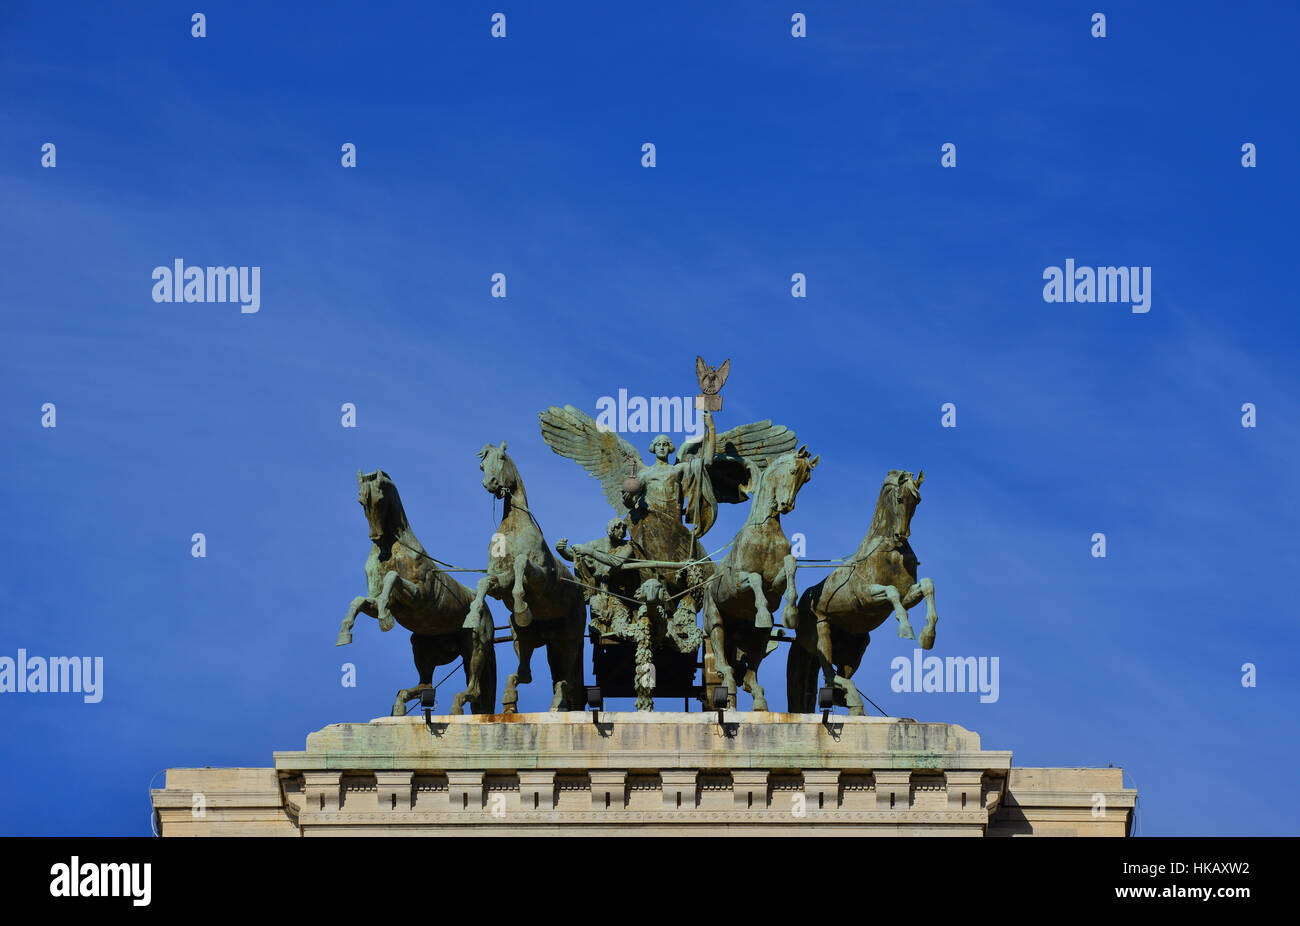 Goddess of Justice bronze quadriga at the top of old Palace of Justice in Rome, with blue sky and copy space Stock Photo